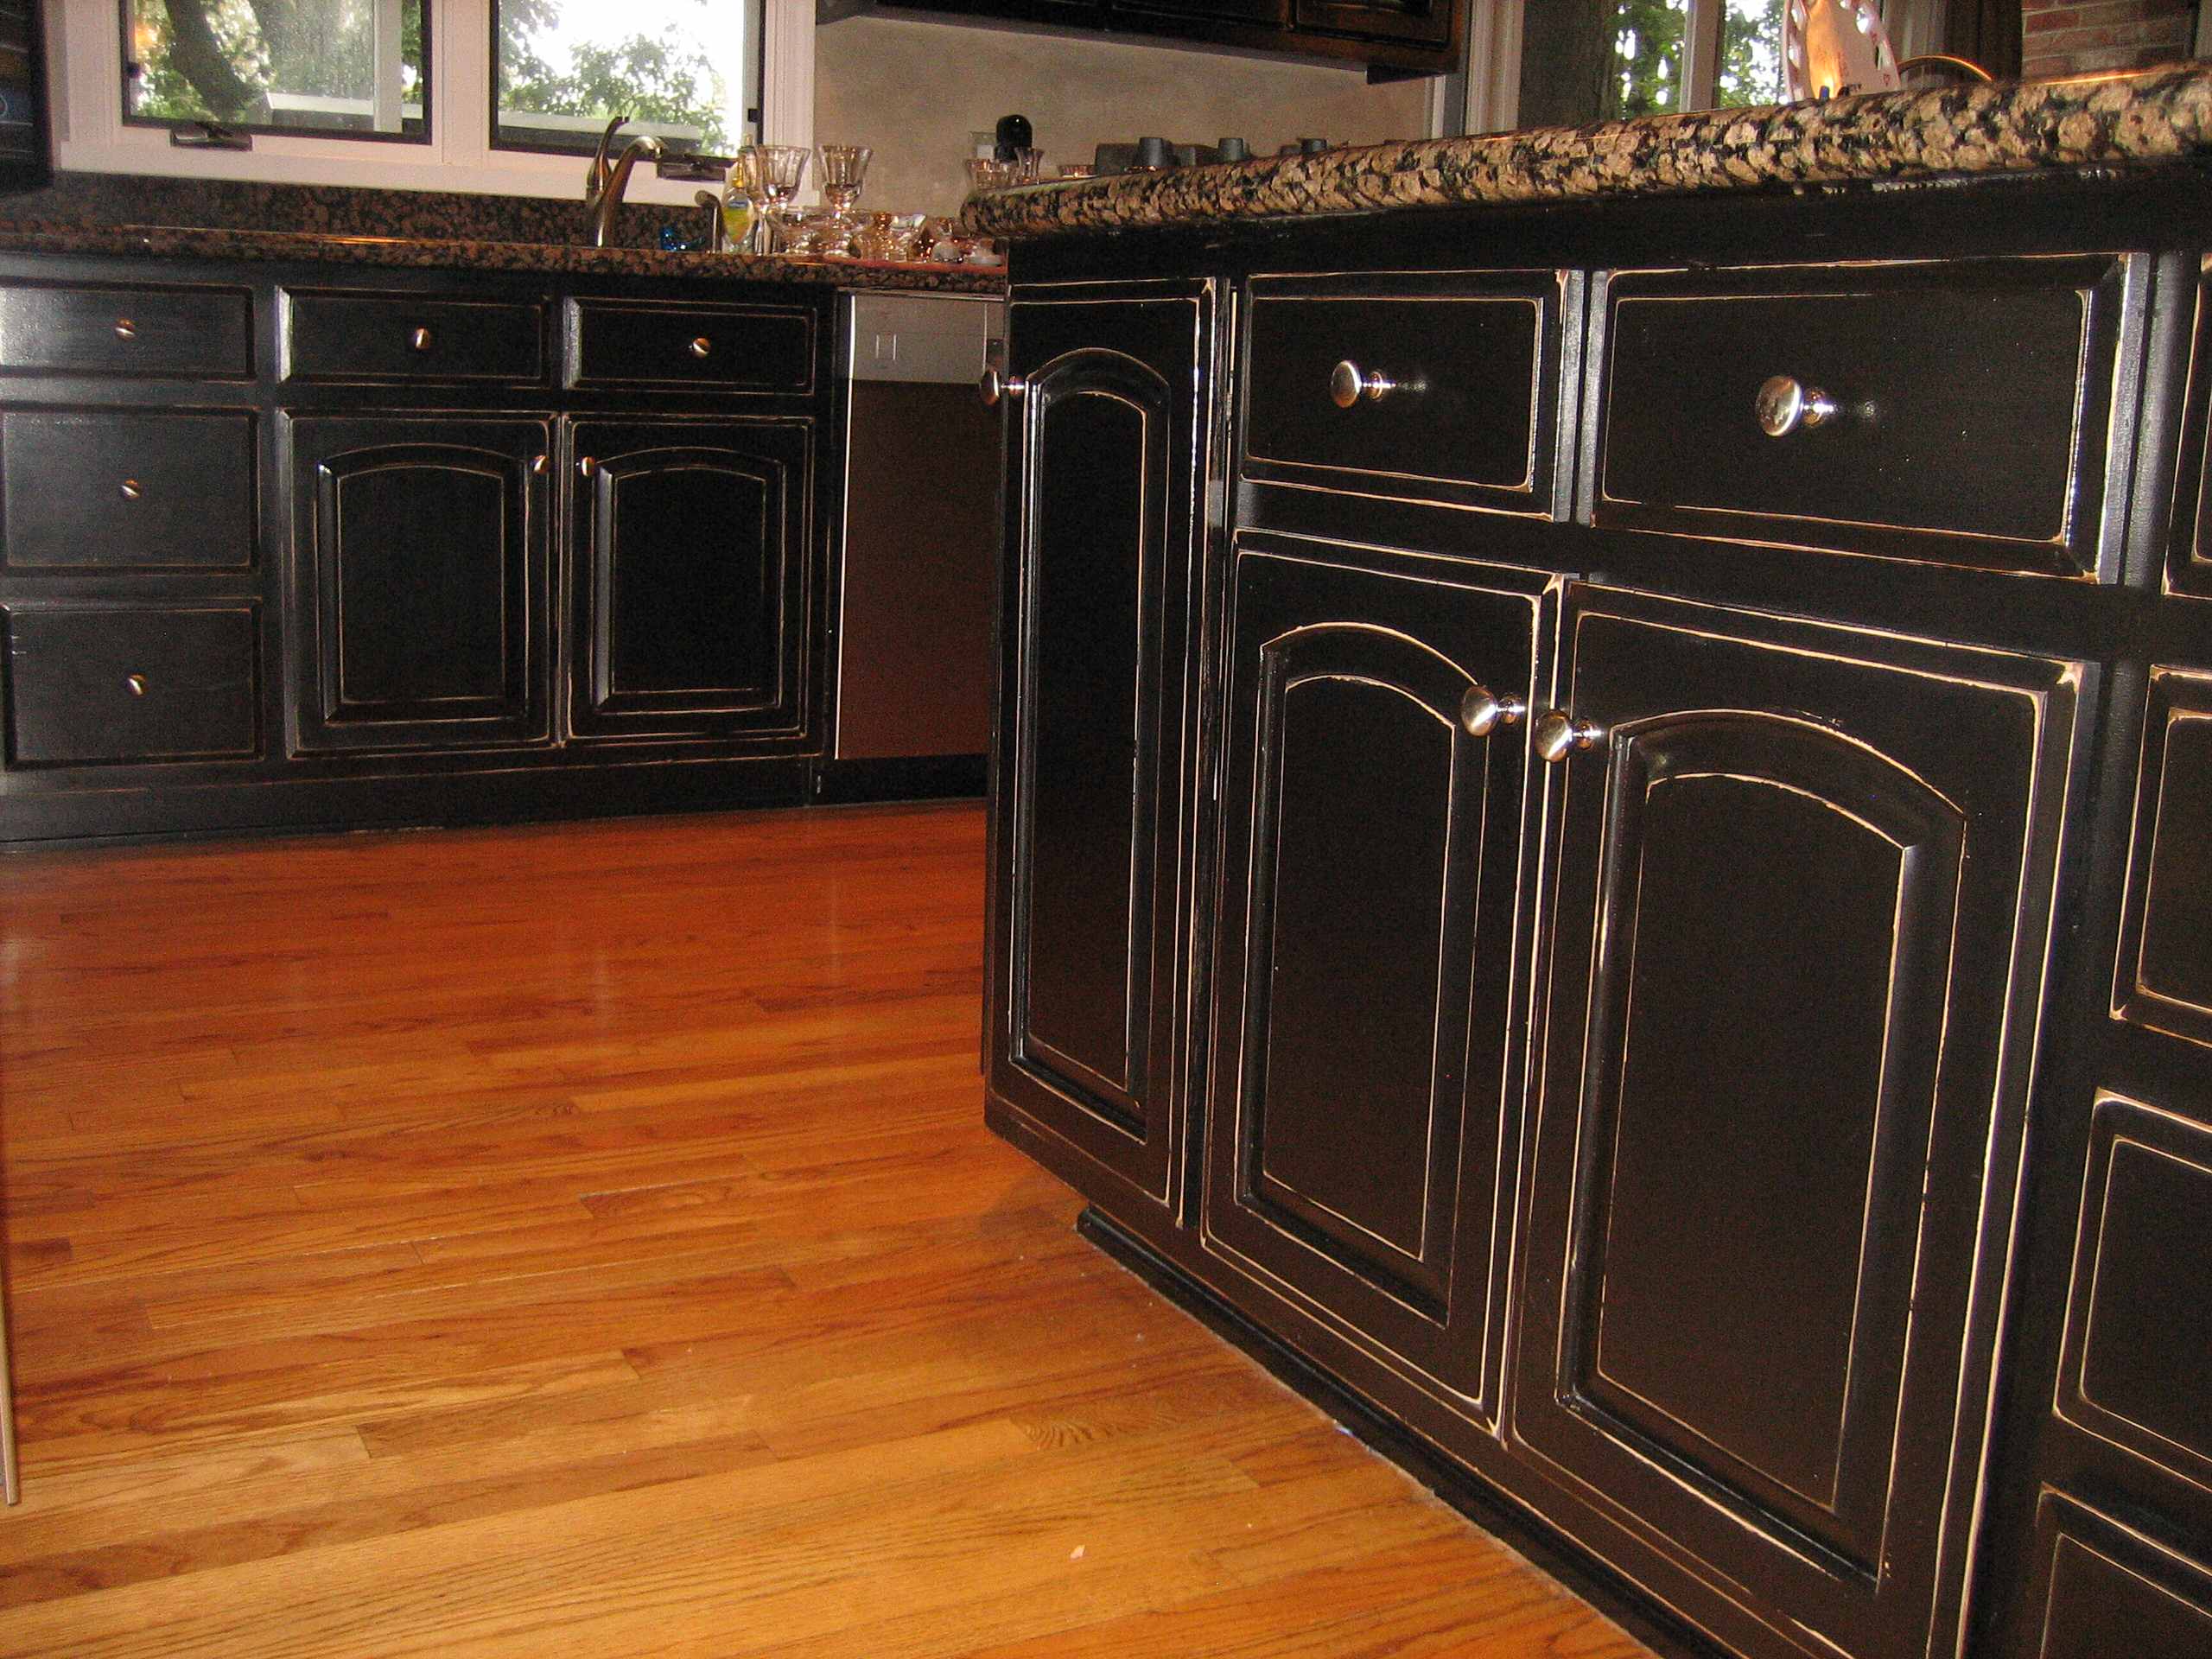 Distressed Black Cabinets Houzz, Black Distressed Kitchen Cabinets Pictures